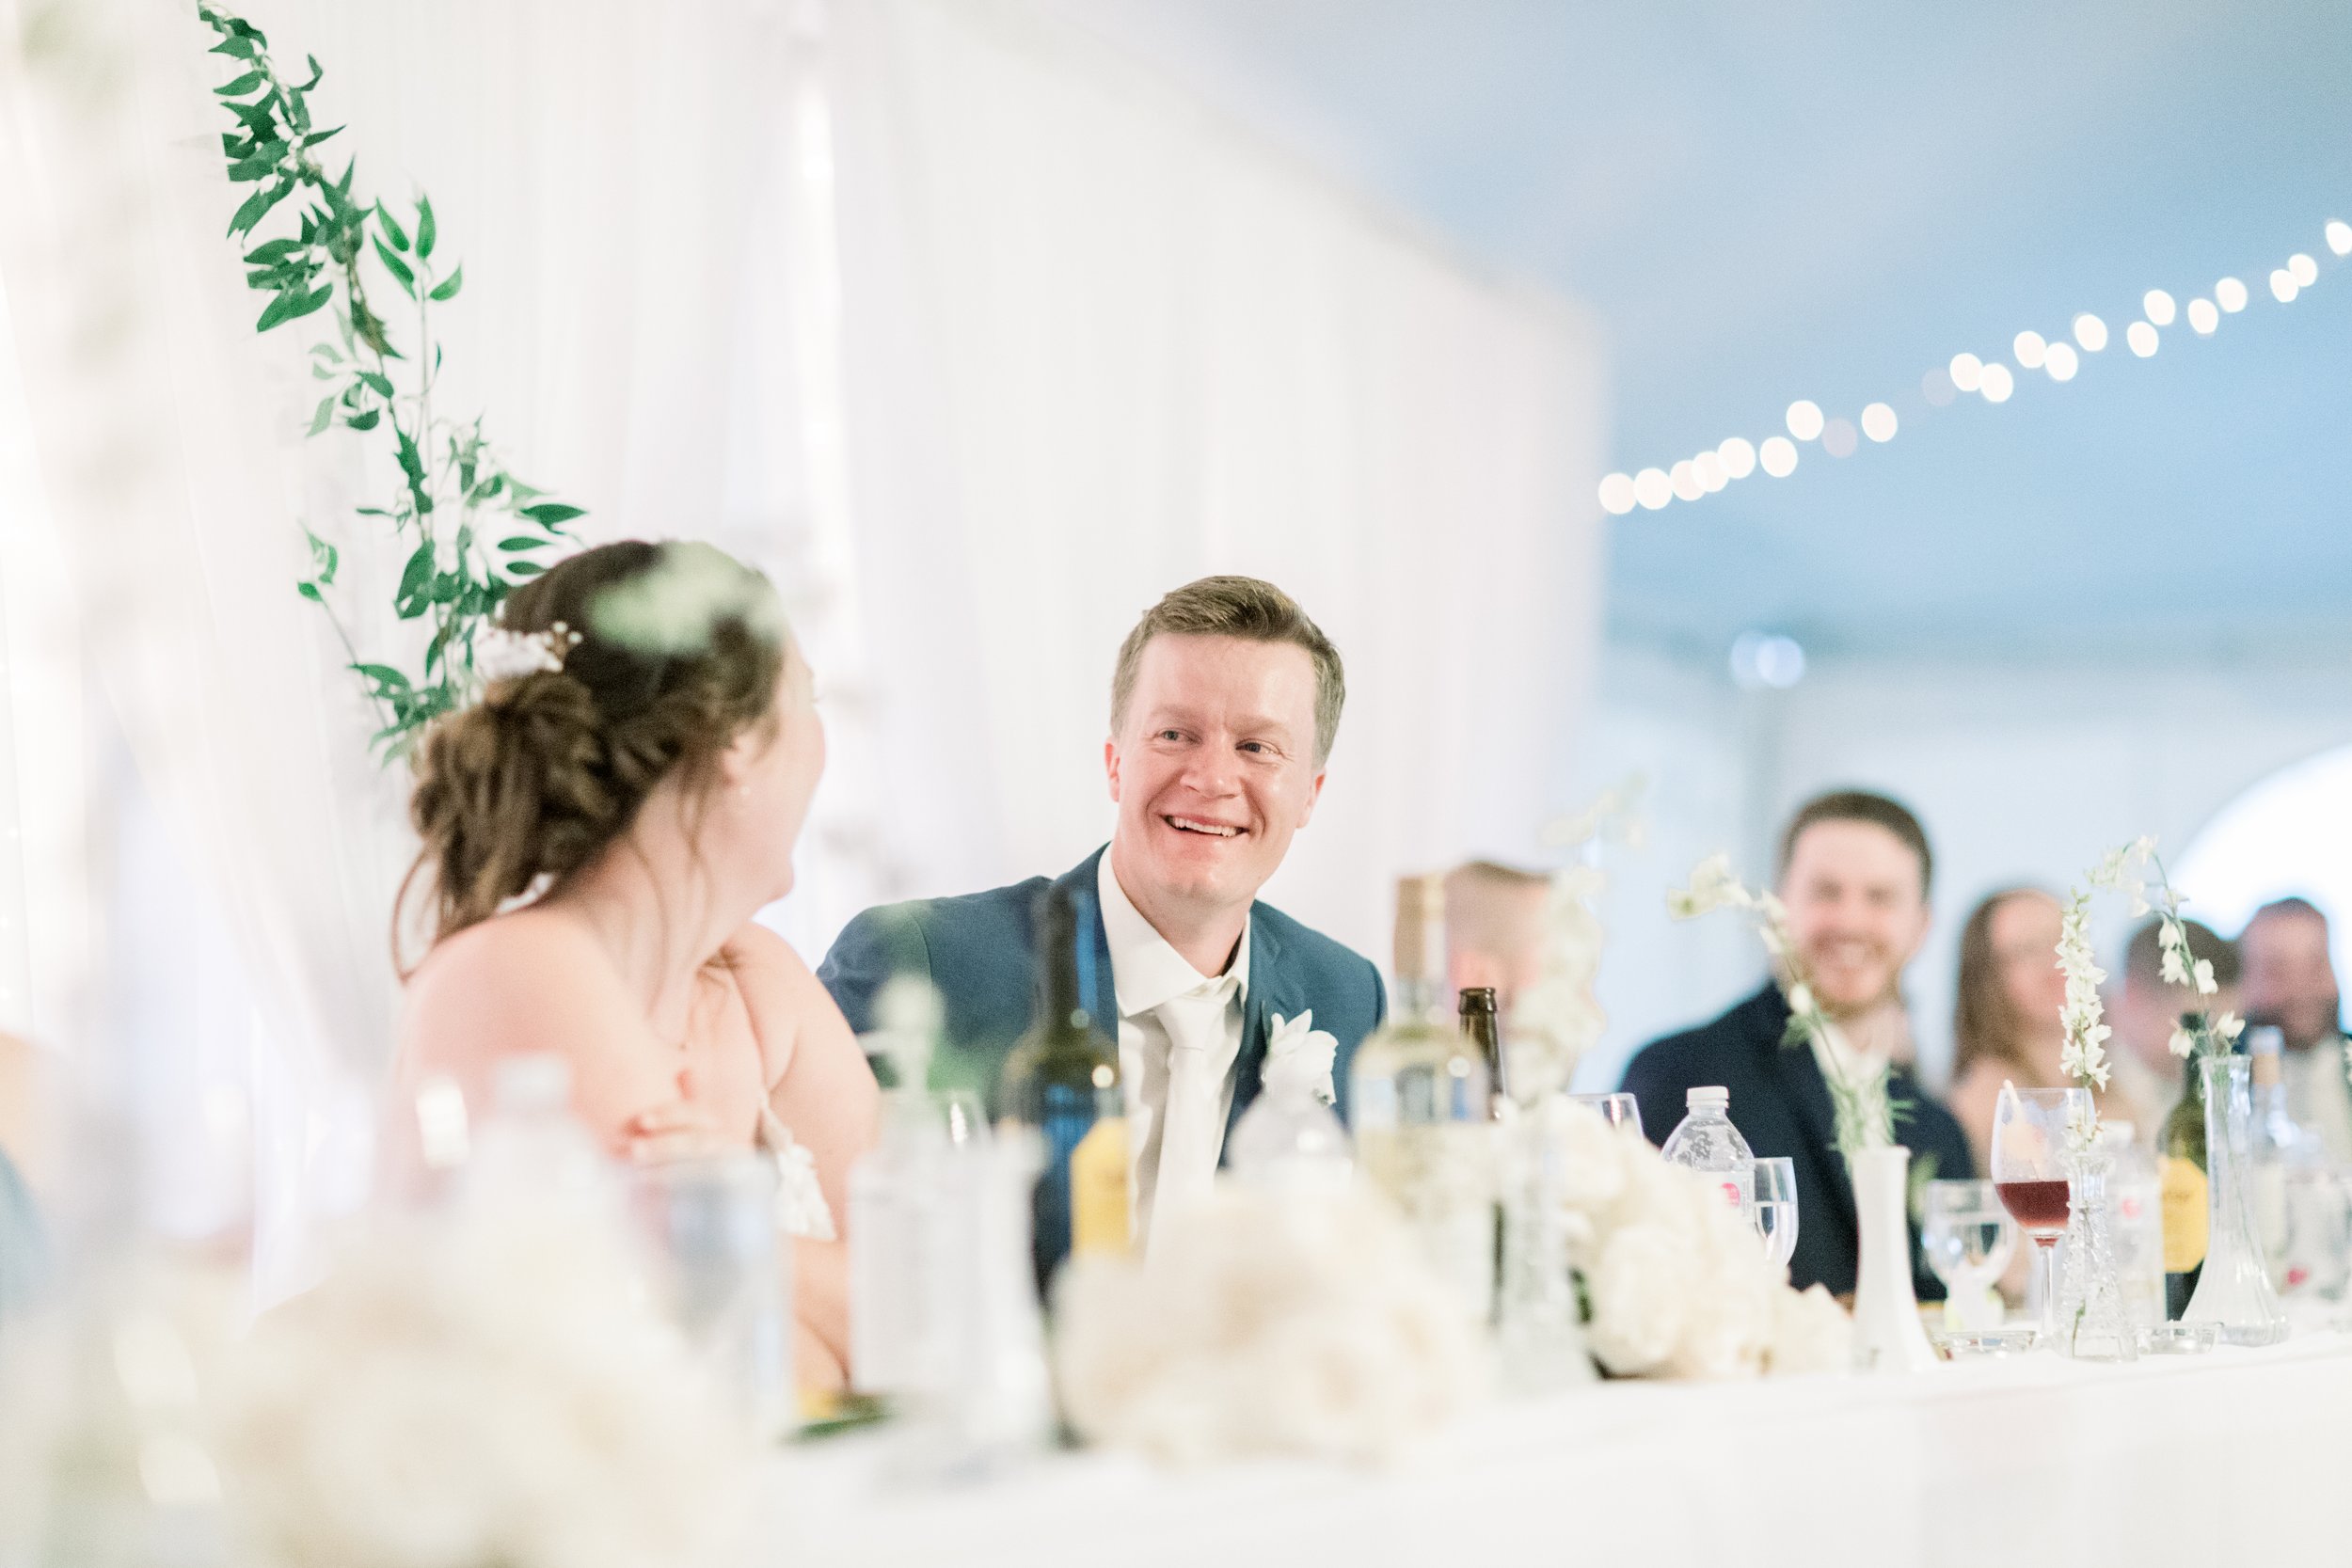  Chelsea Mason Photography captures a groom laughing with the bride sitting at the luncheon head table. groom laughing wedding luncheon #chelseamasonphotography #chelseamasonweddings #Ontarioweddings #Boulterweddingphotographer #laceweddinggown 